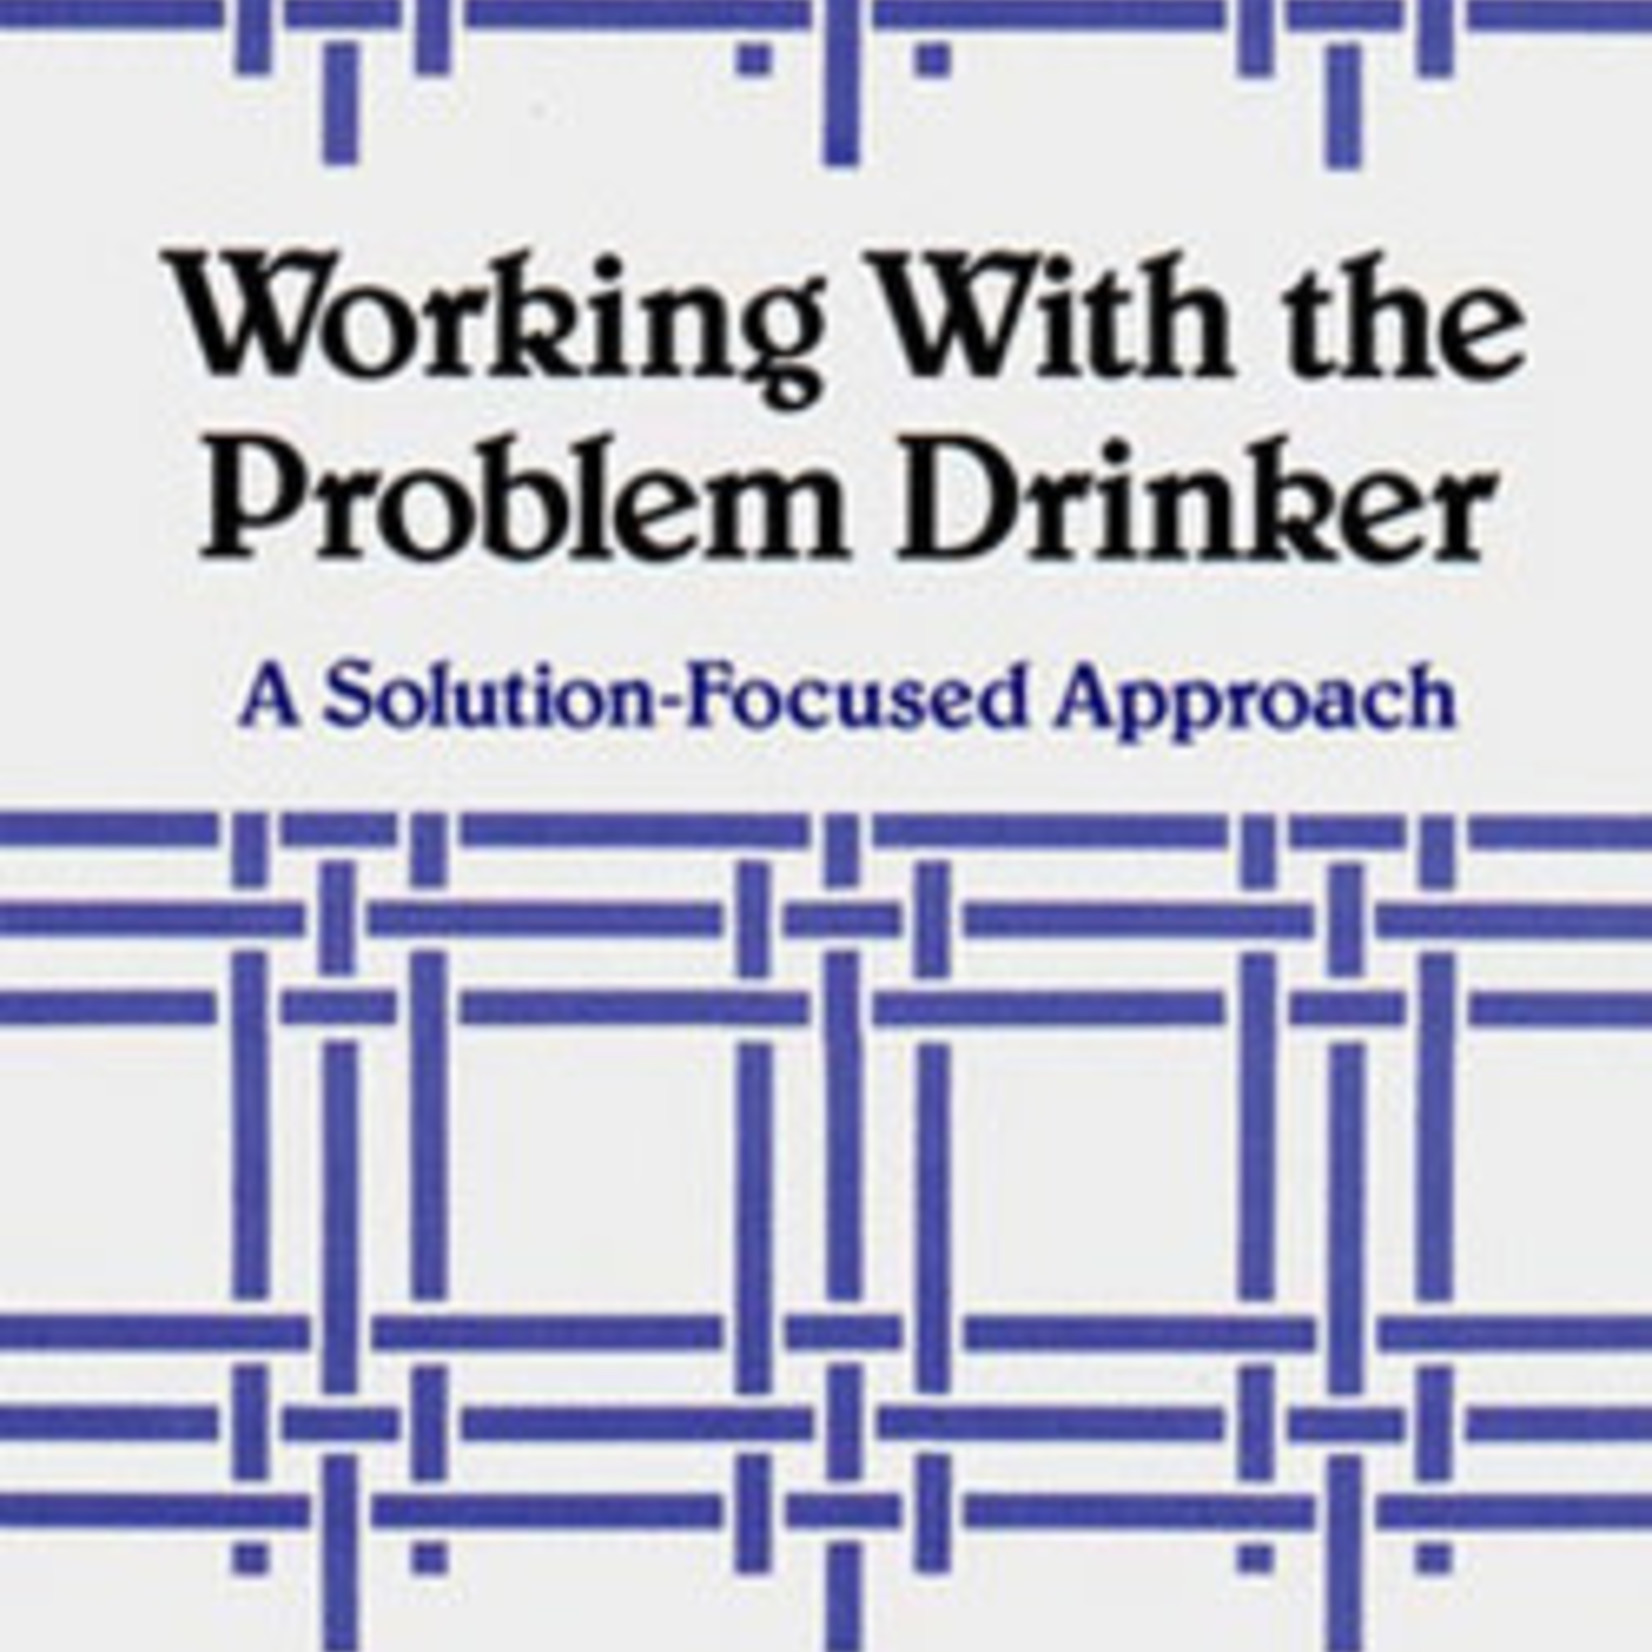 Working With the Problem Drinker